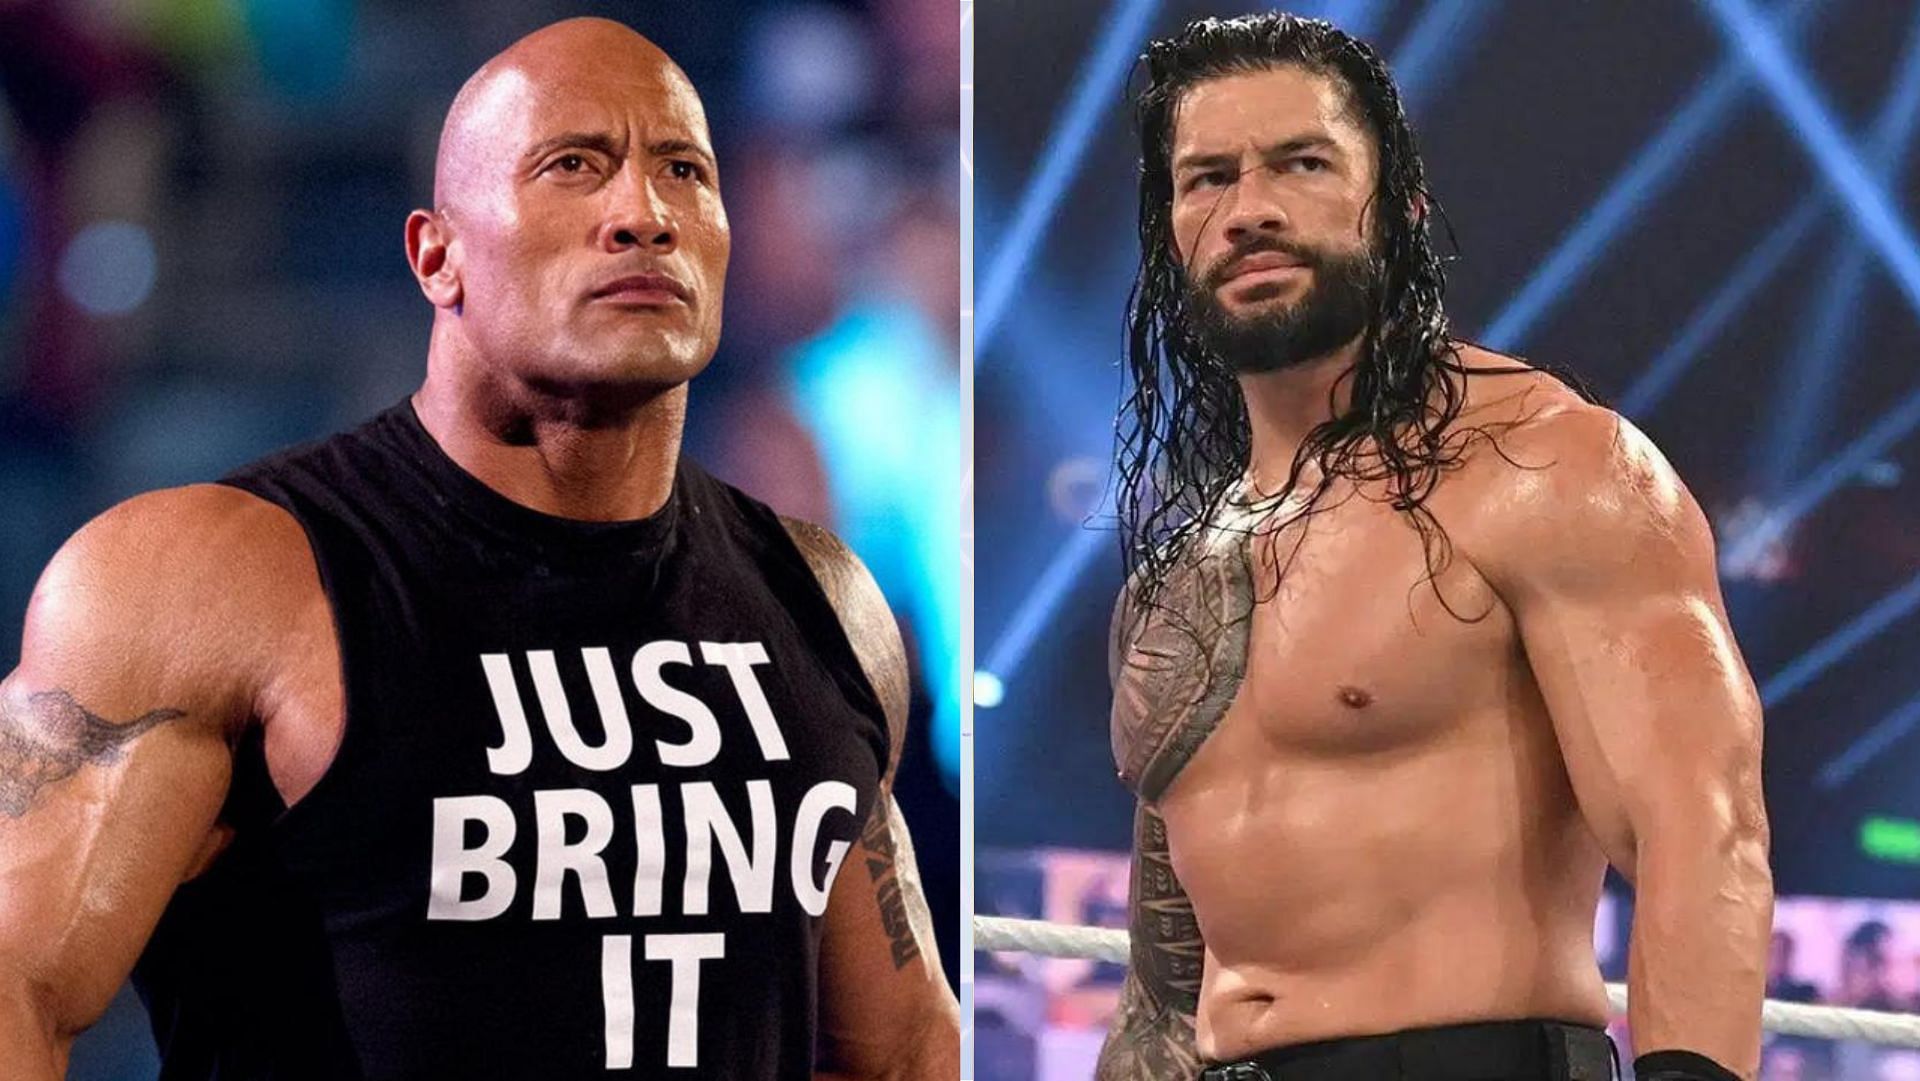 Roman Reigns and The Rock are not blood relatives